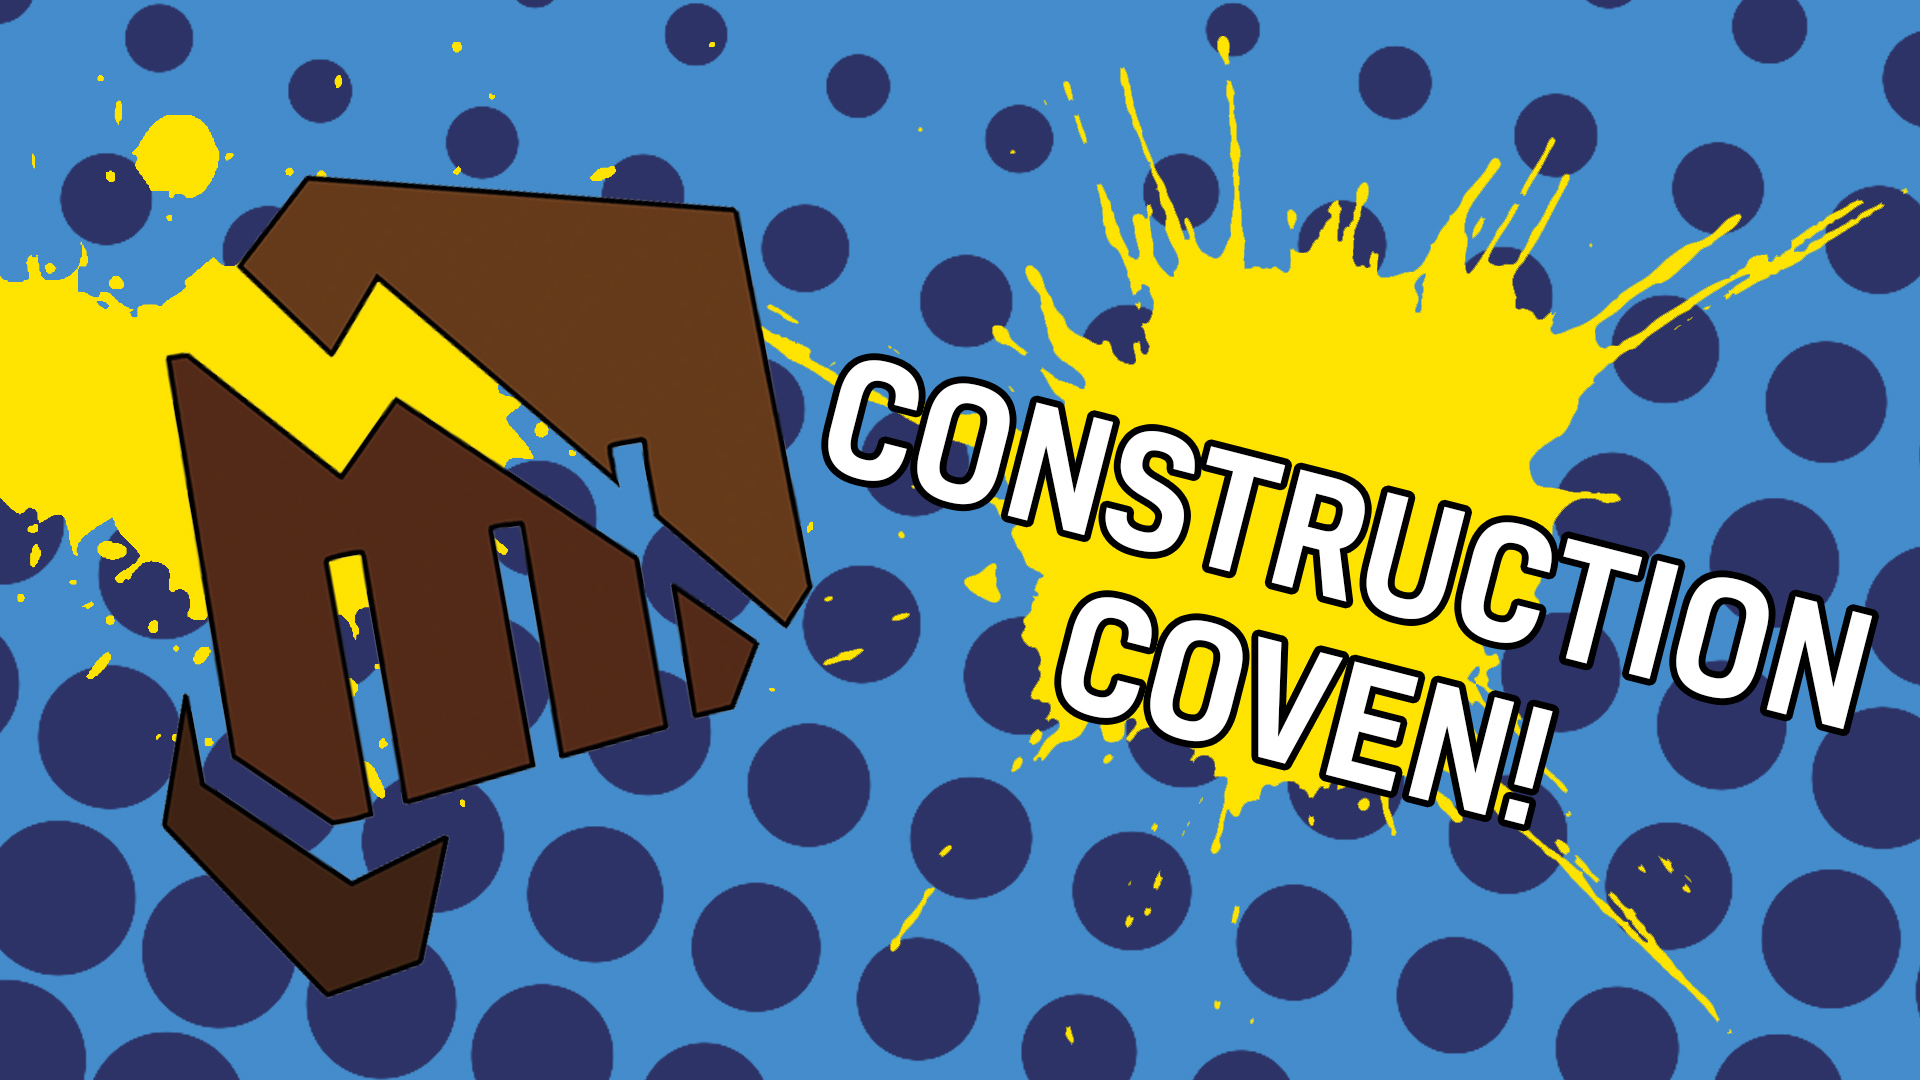 Result: Construction Coven!